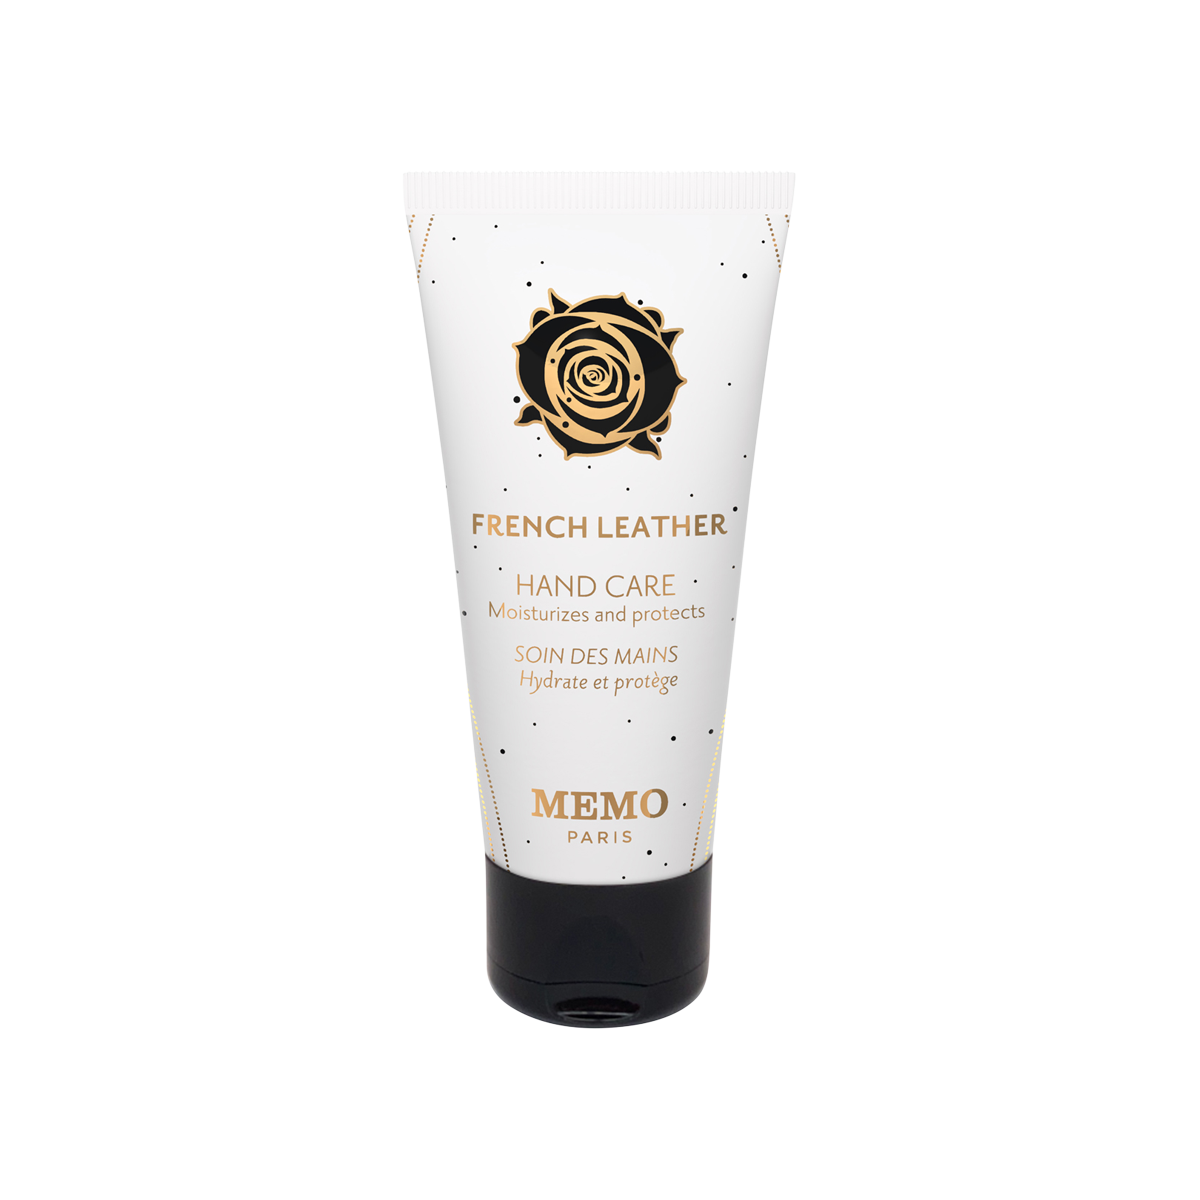 Memo Paris - Hand Care French Leather